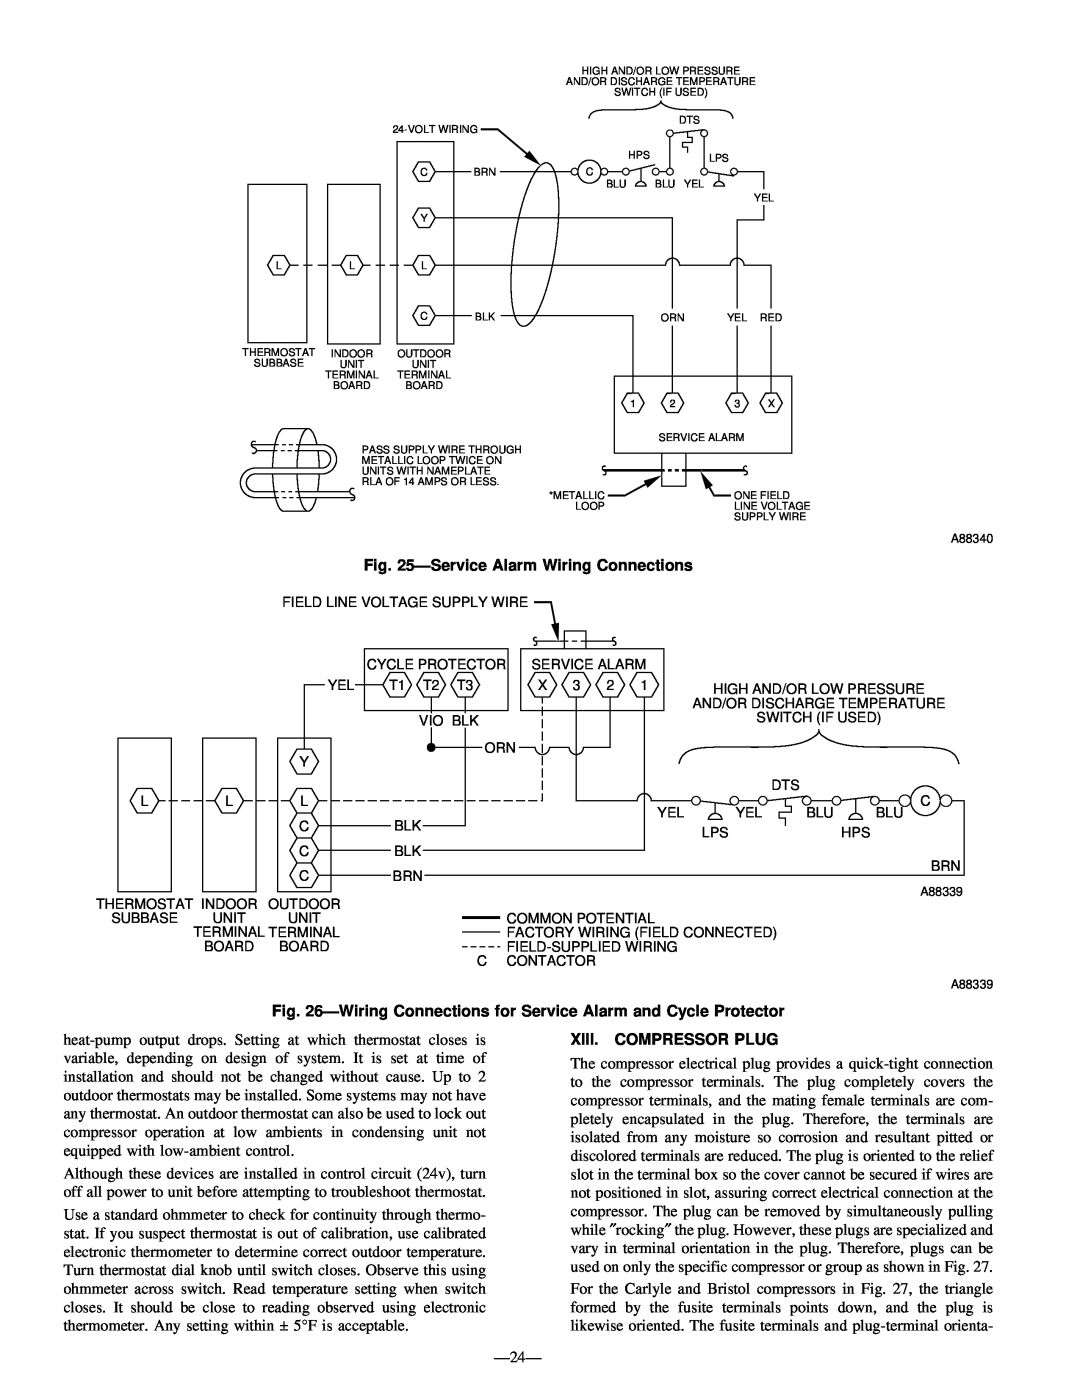 Bryant R-22 service manual ServiceAlarm Wiring Connections, Xiii. Compressor Plug 